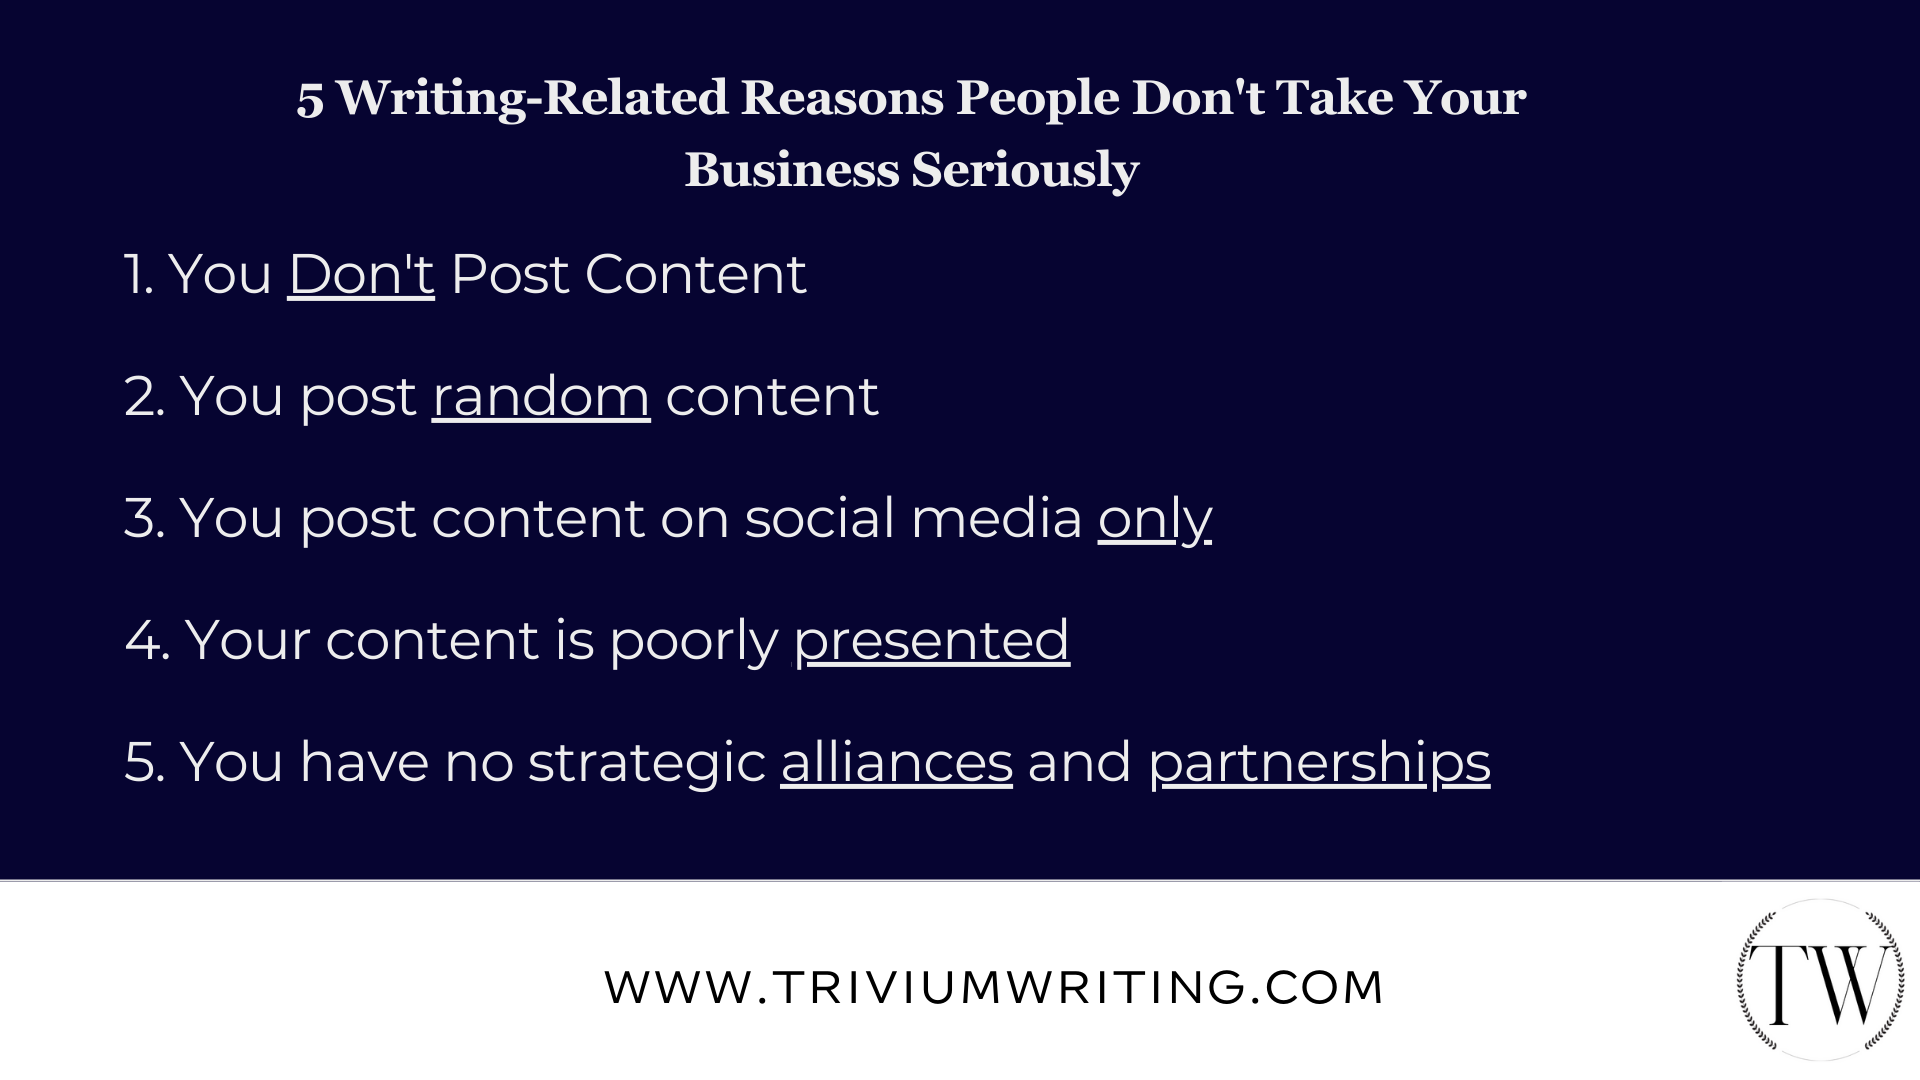 5 writing-related reasons people don't take your business seriously